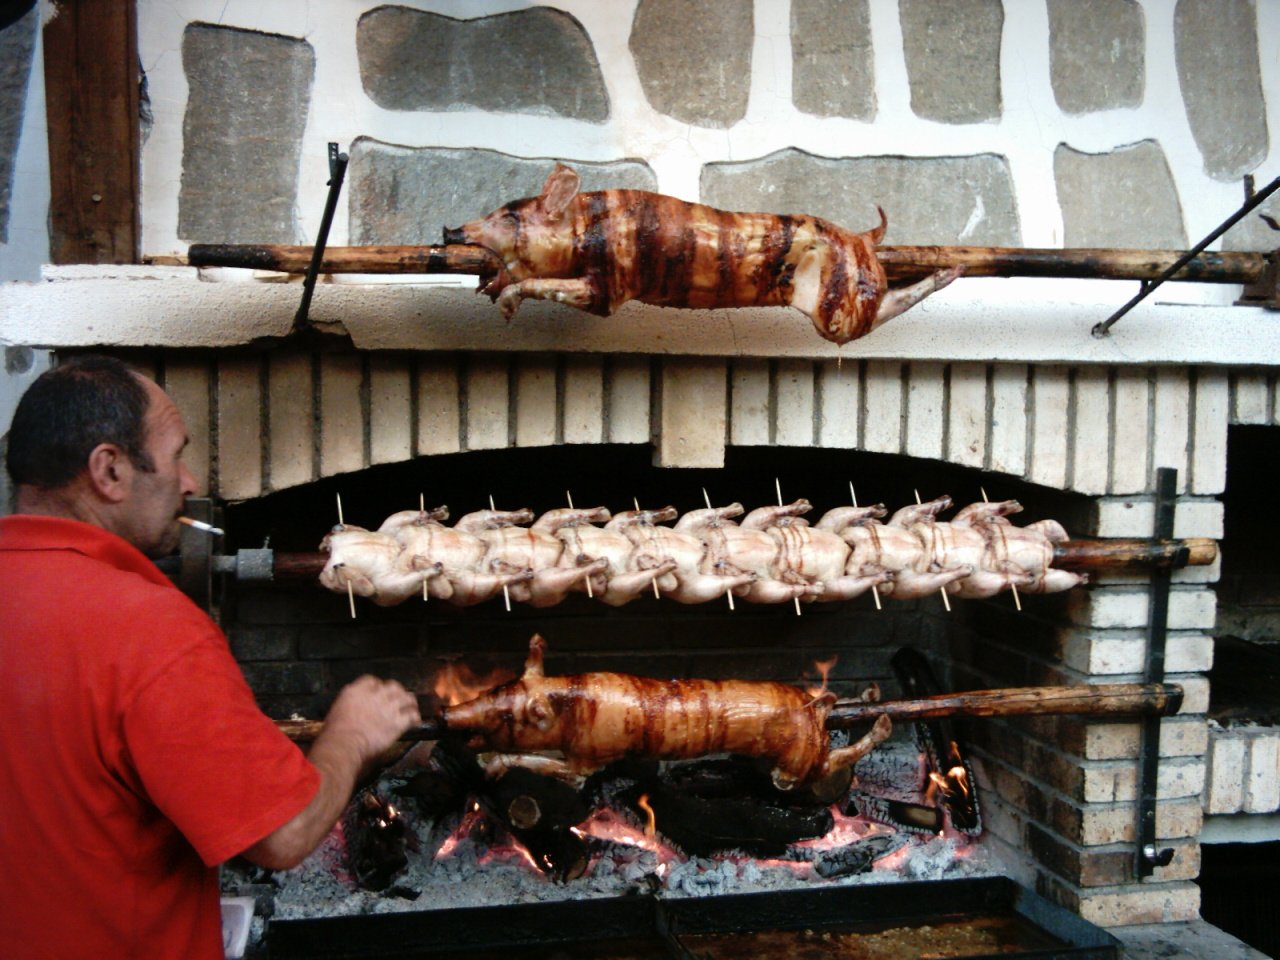 a man is grilling several meats in front of him